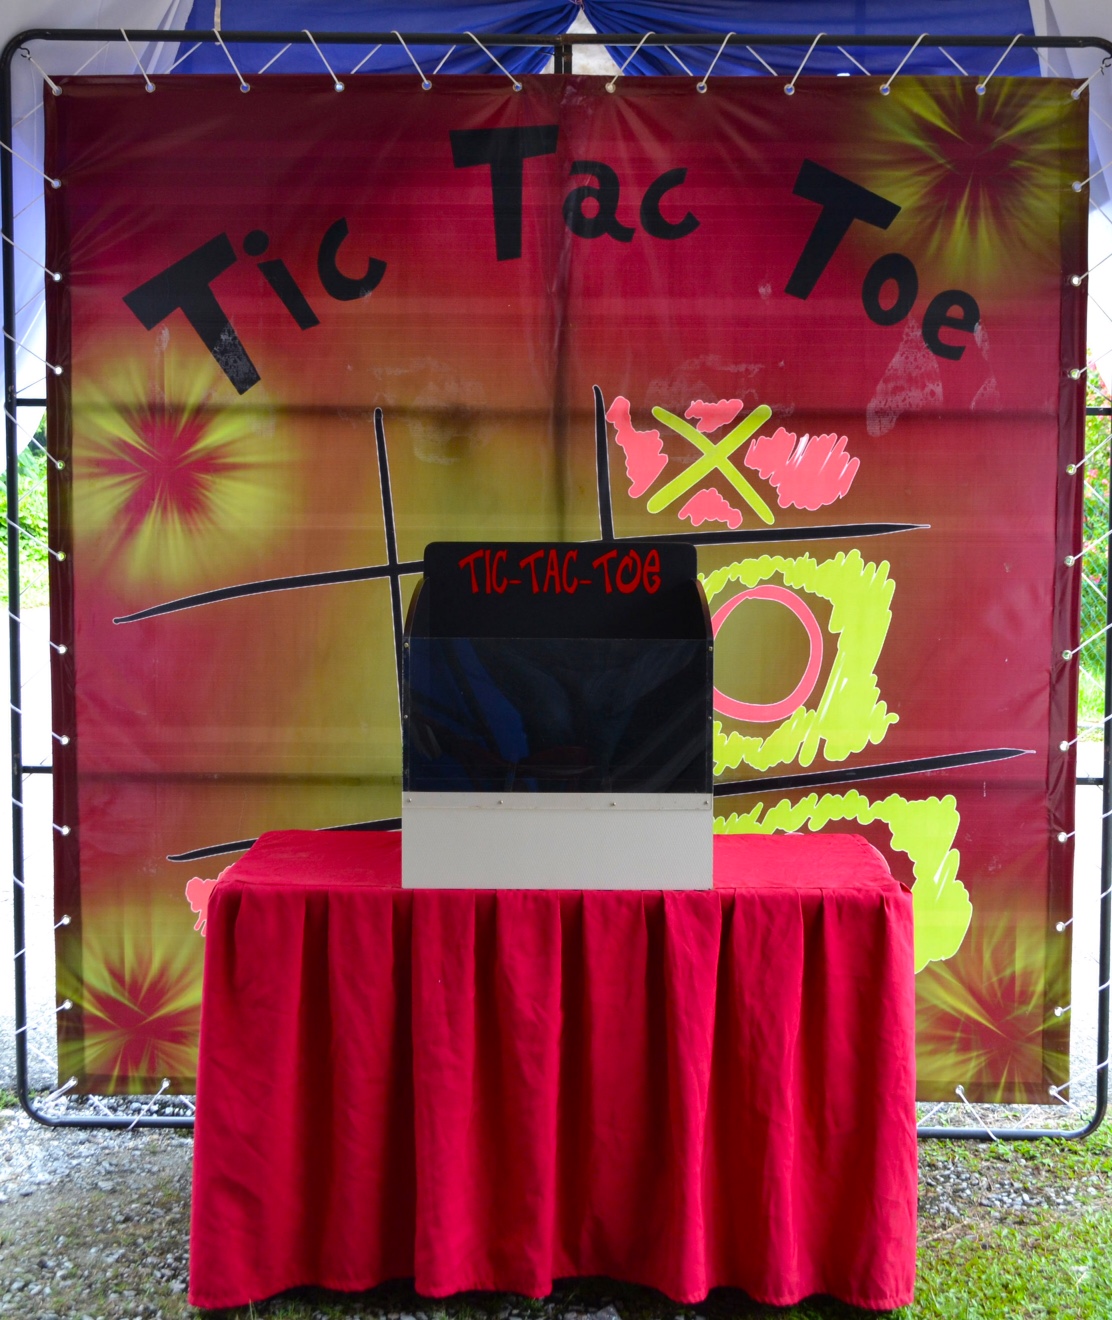 The most interesting and unconventional 'Tic-Tac-Toe' game can be found at Carnival Funtime.